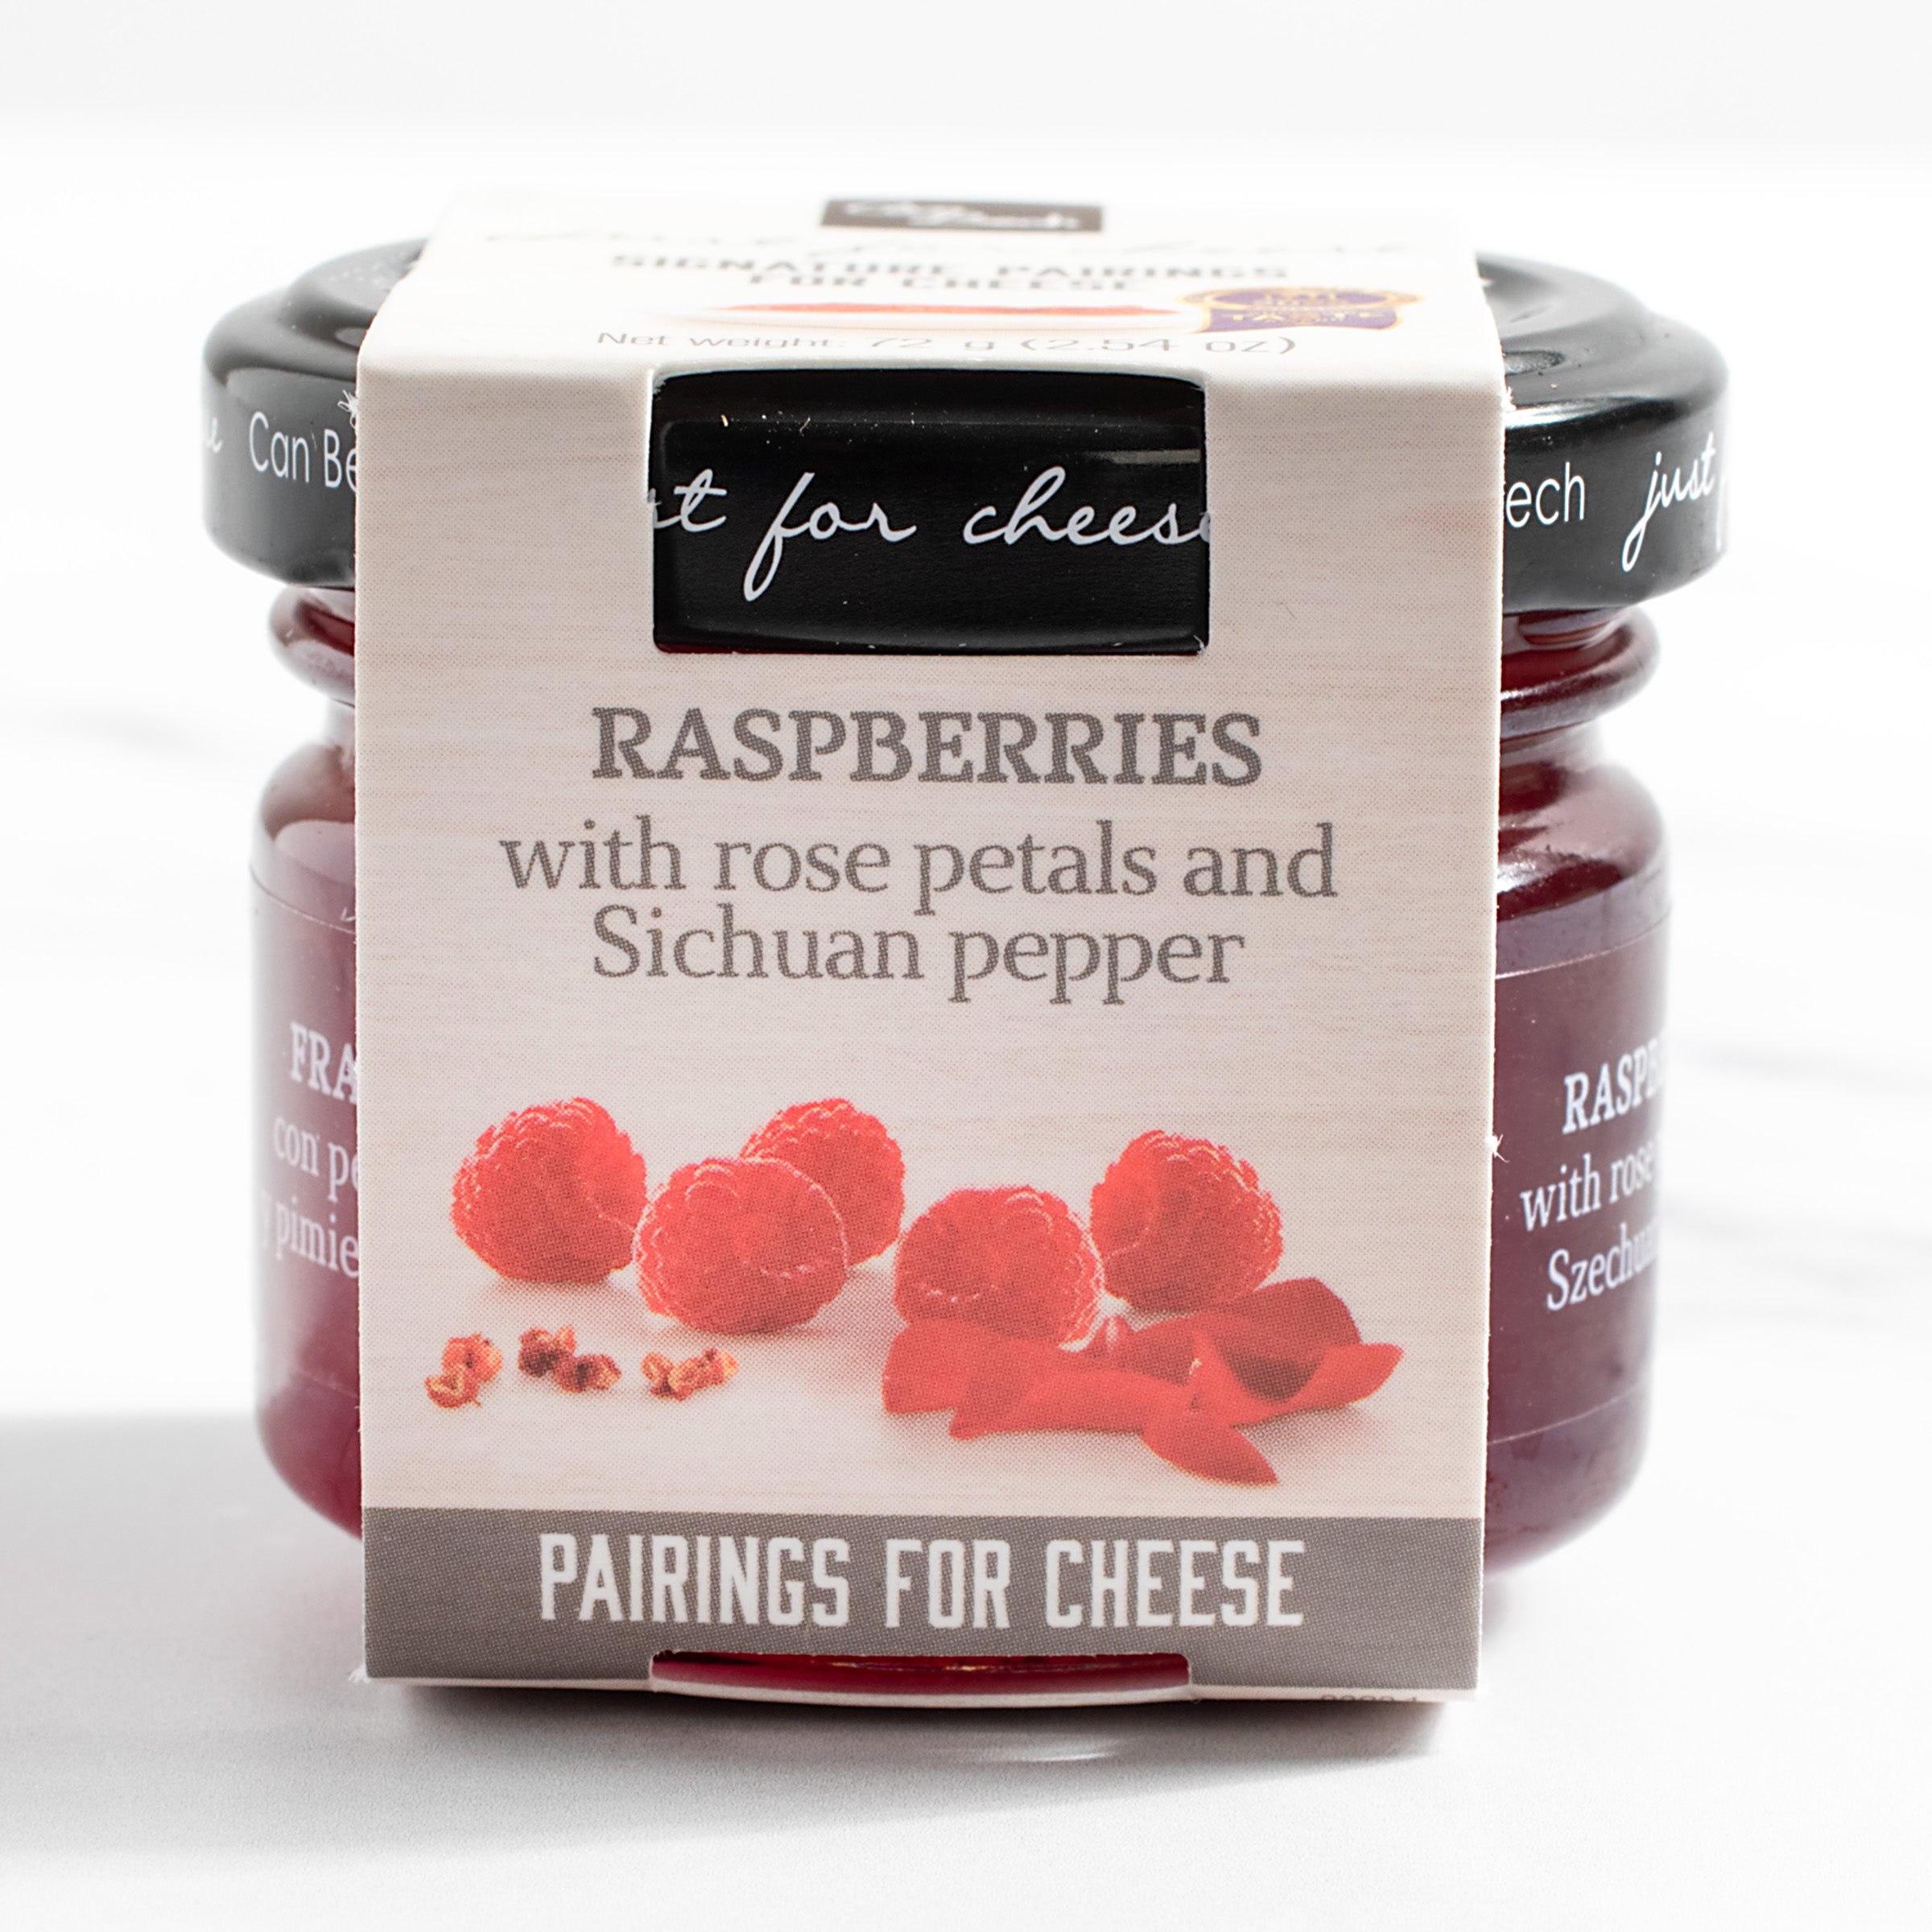 igourmet_15165-2_Spanish Raspberries with Rose Petals and Sichuan Pepper Spread for Fresh and Soft Cheeses_Can Bech_Jam, Preserves & Nut Butter